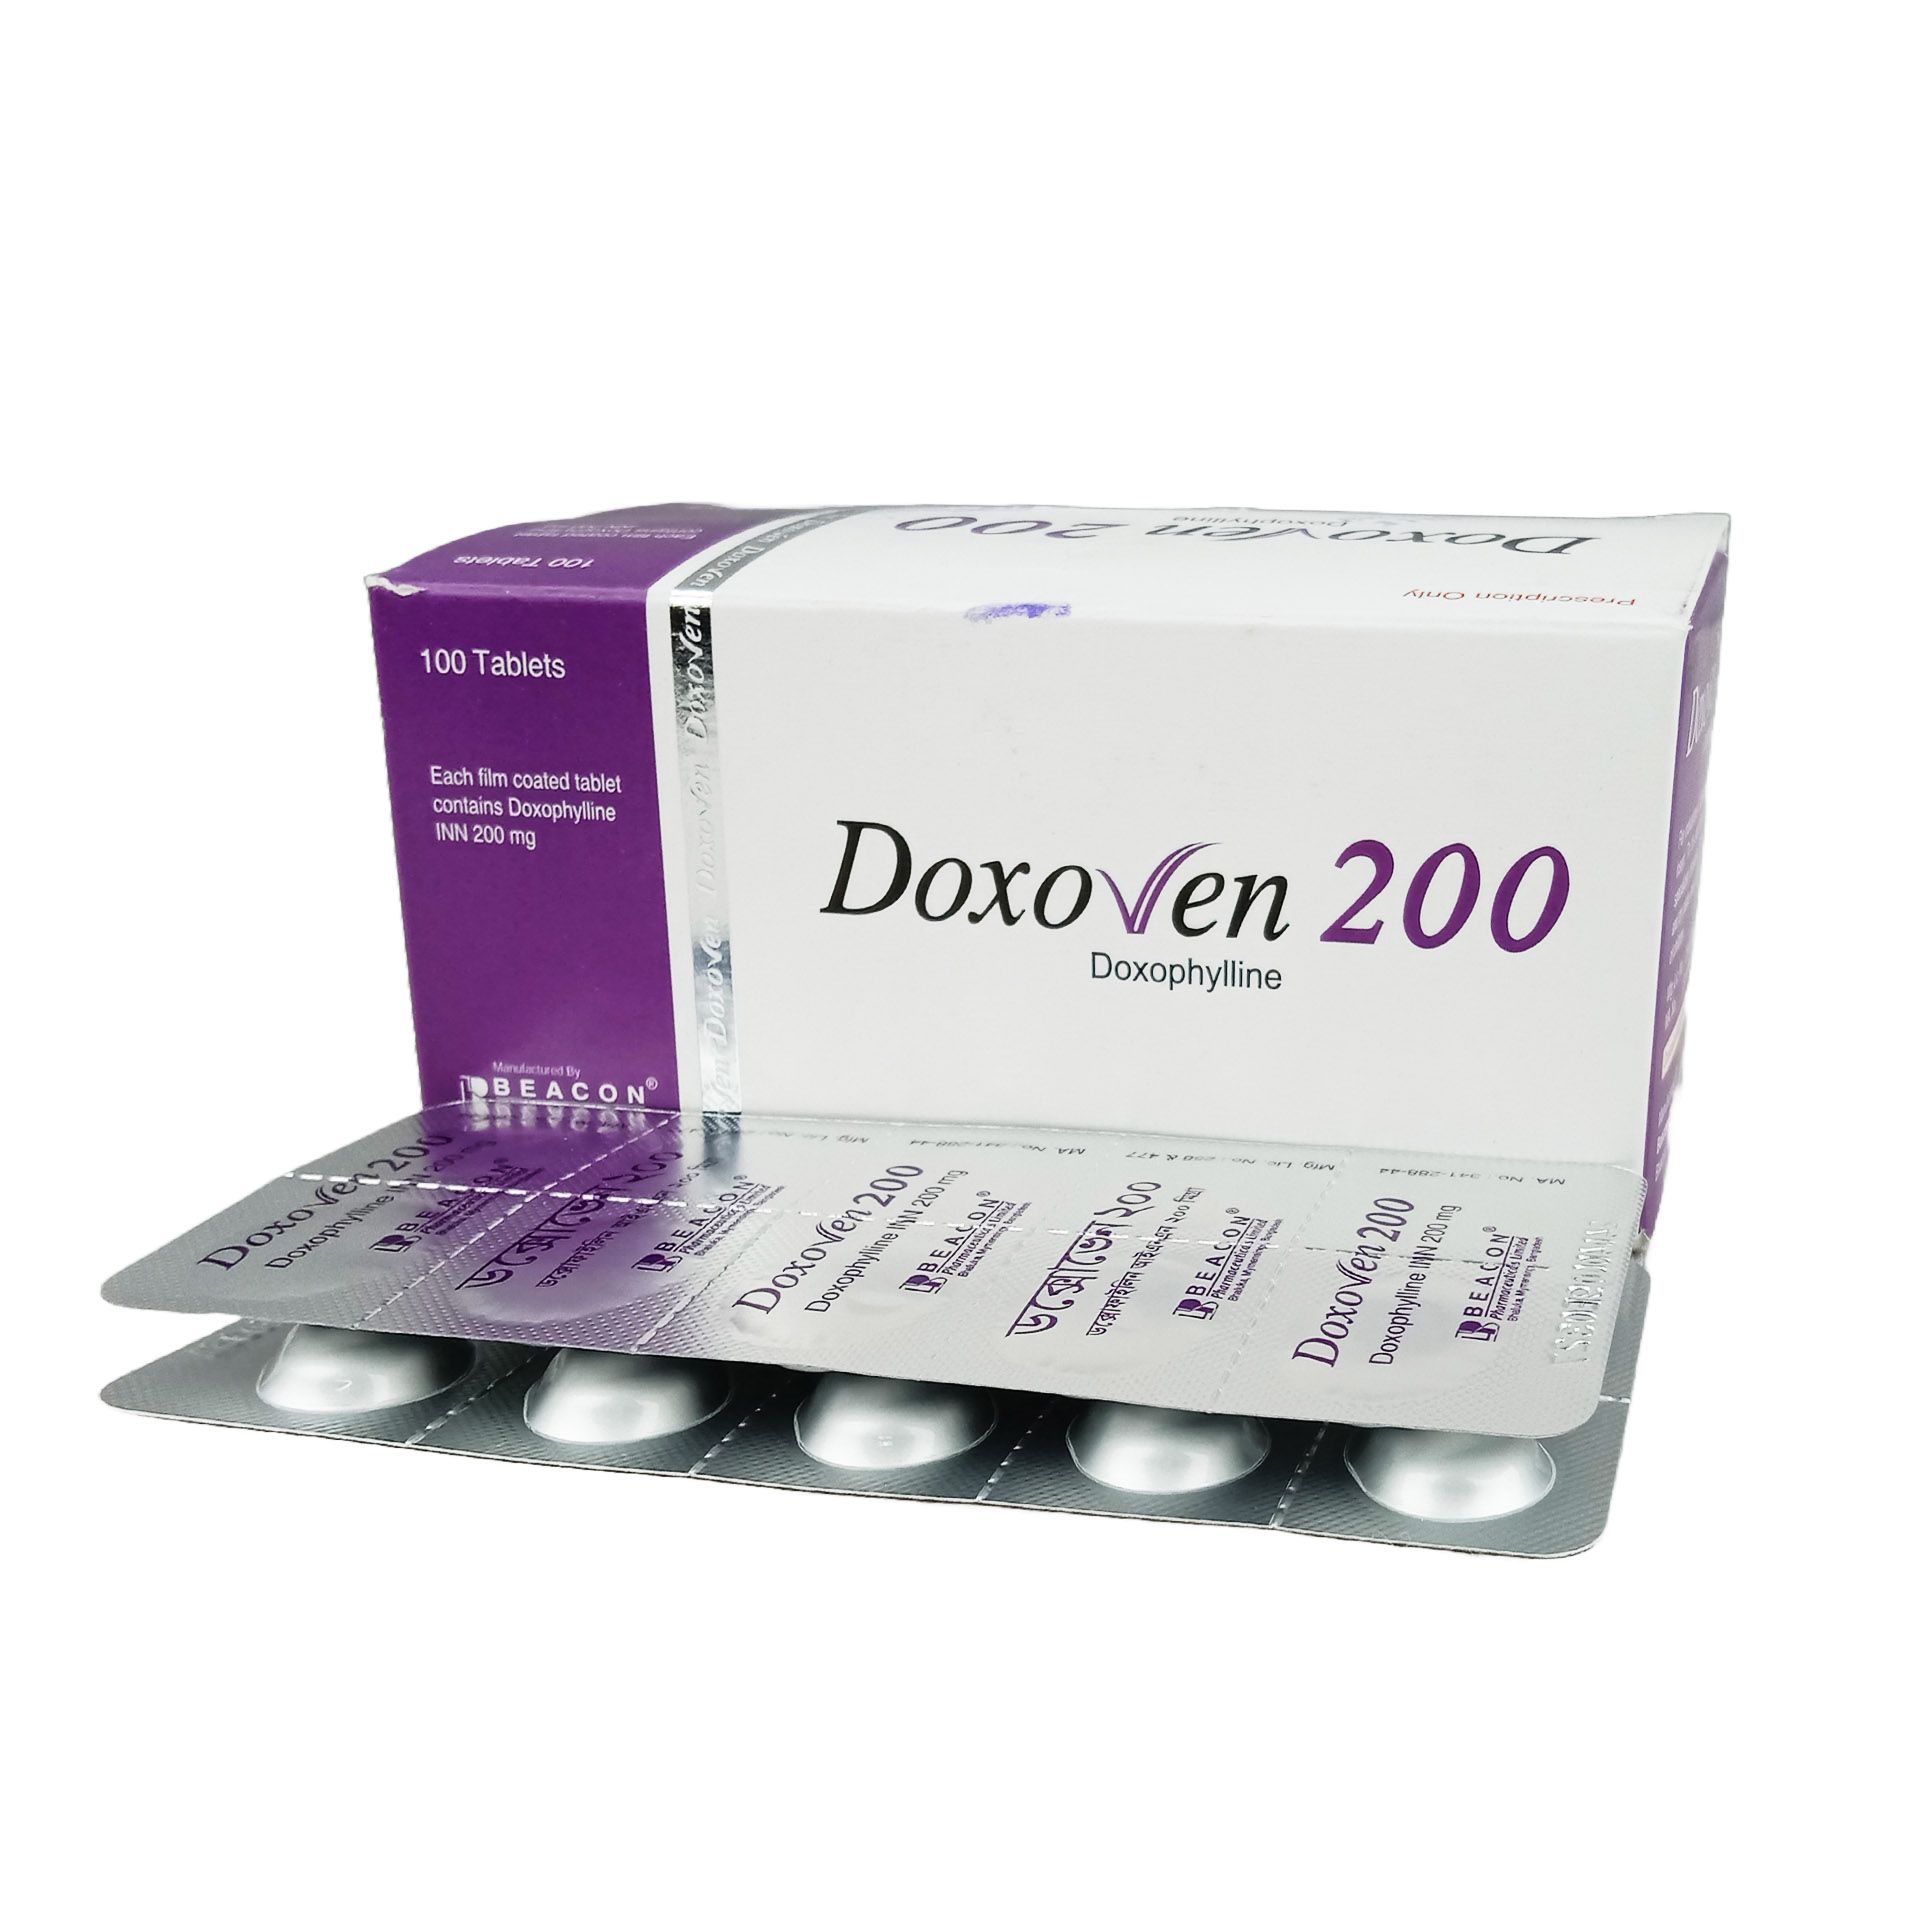 Doxoven 200mg Tablet